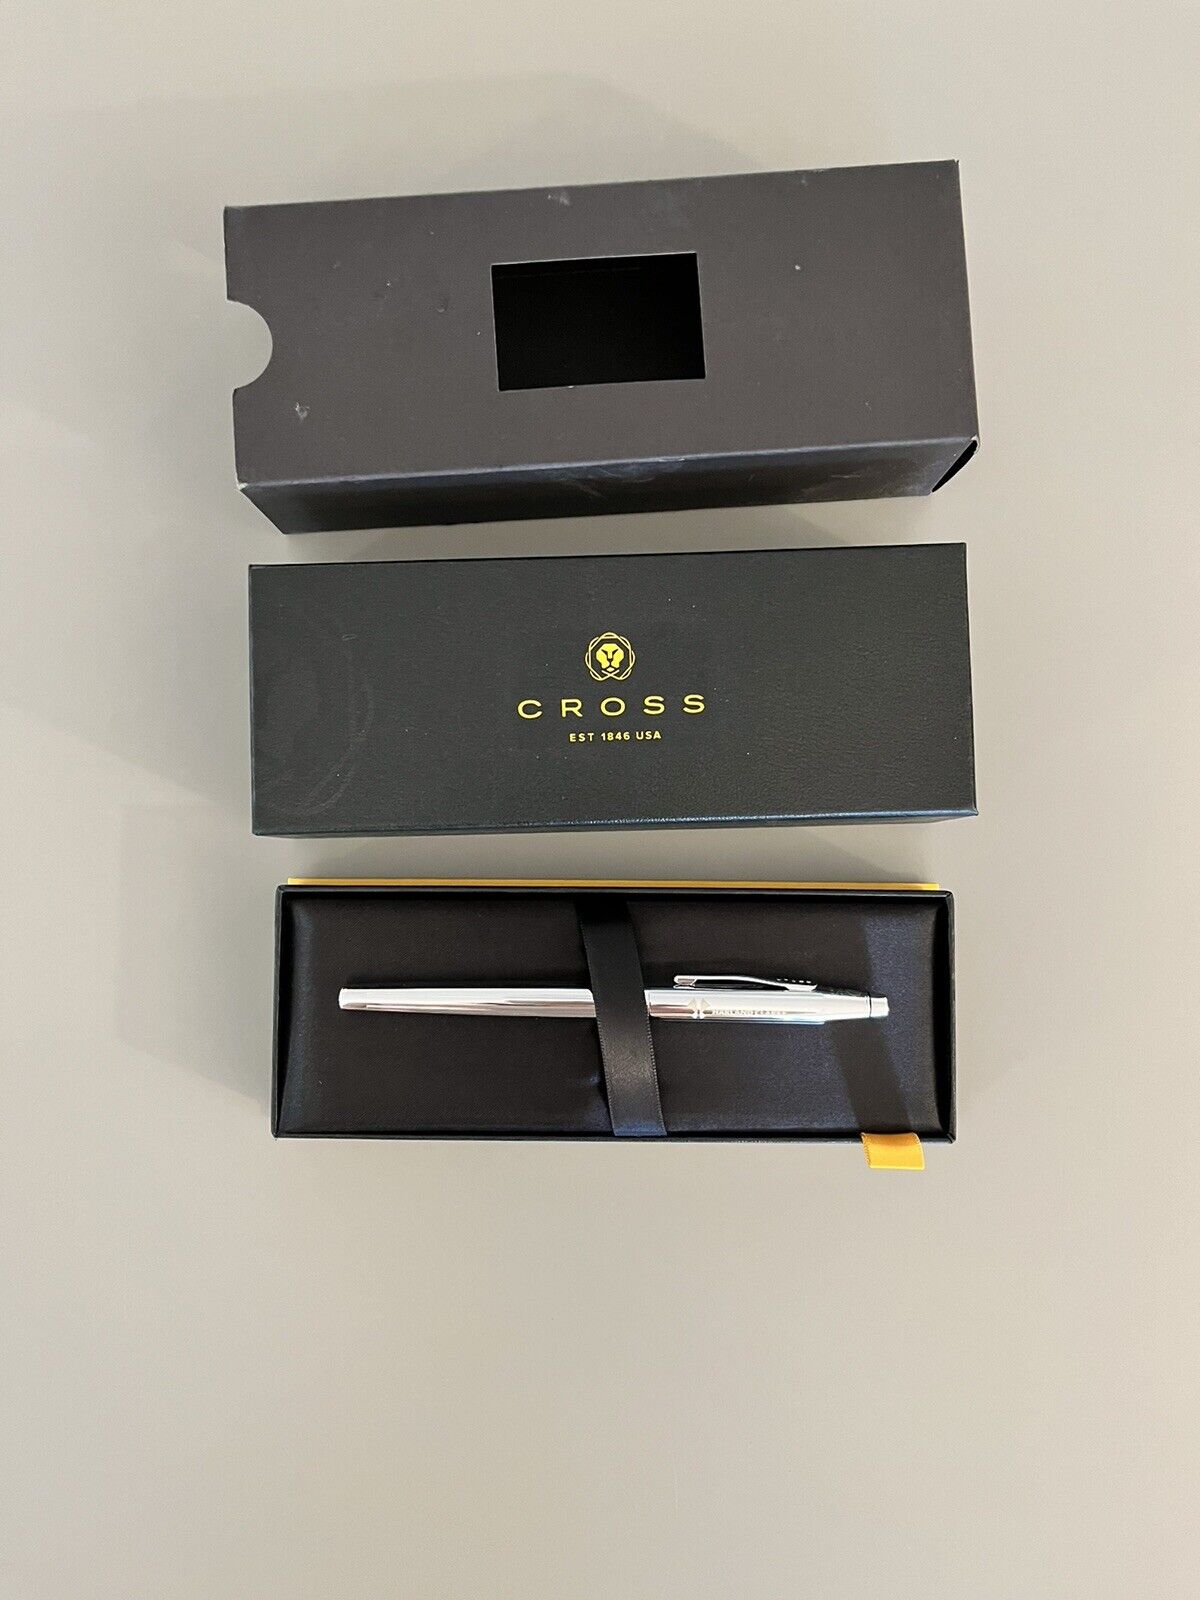 CROSS COUNTRY CHROME BALLPOINT PEN WITH LUXURY GIFT BOX. NEW IN BOX